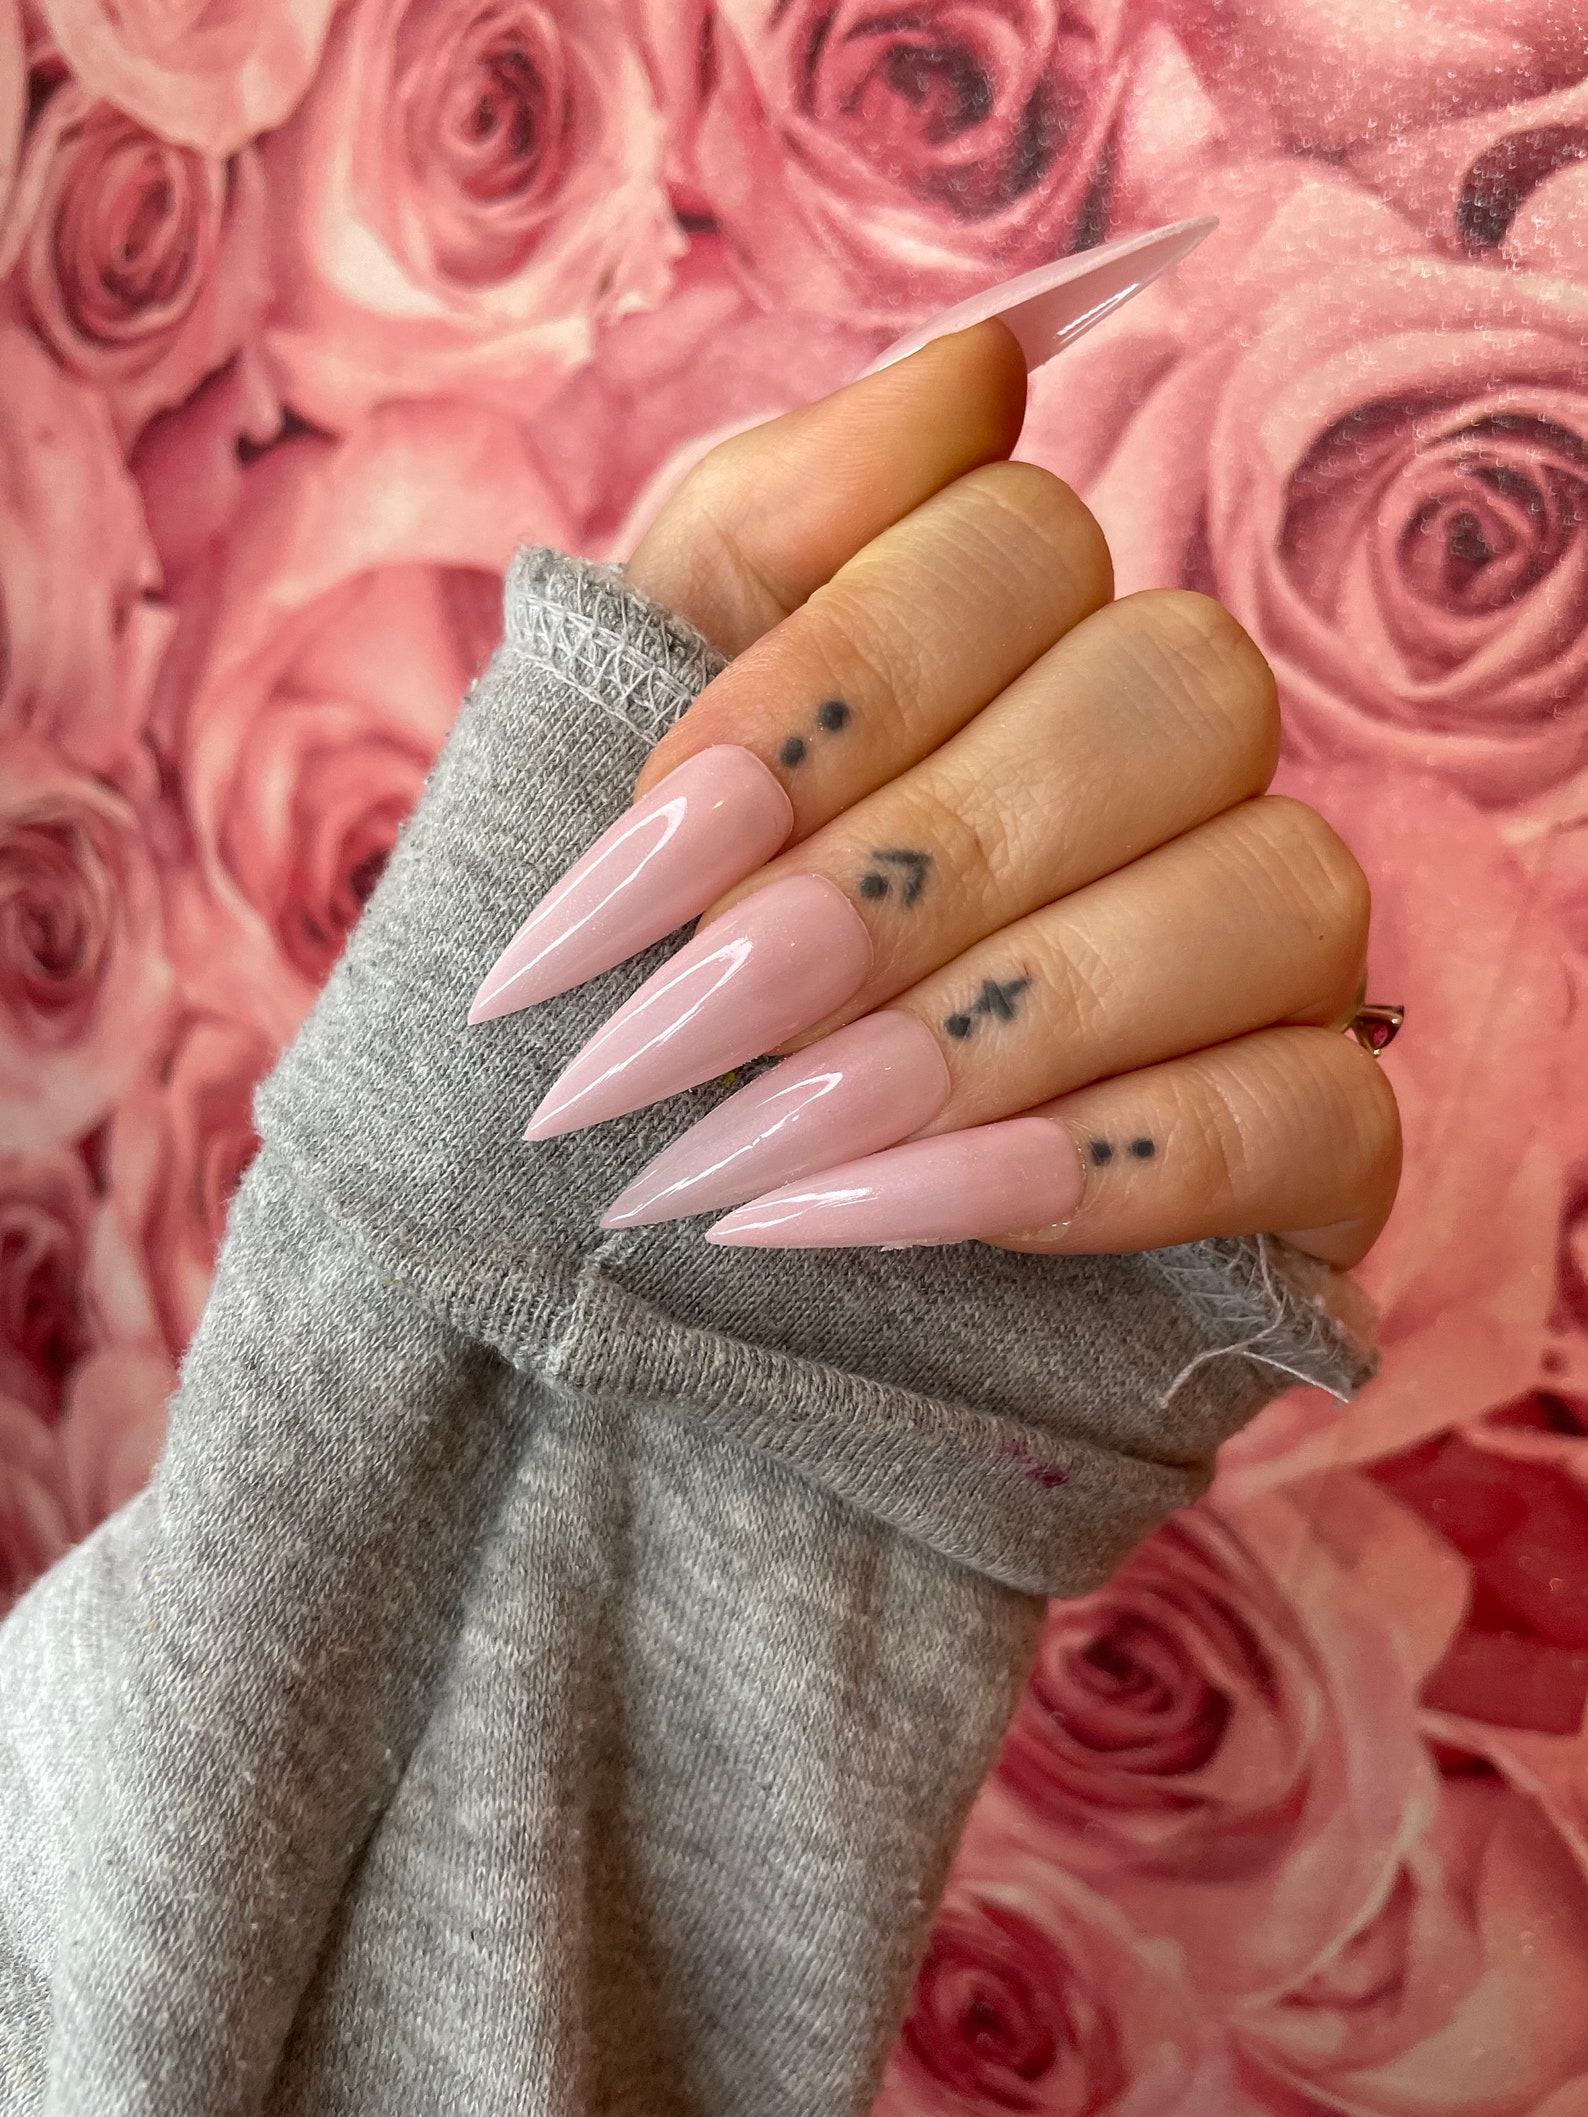 20 Long Nails Ideas for 2023 That You'll Want to Try - College Fashion